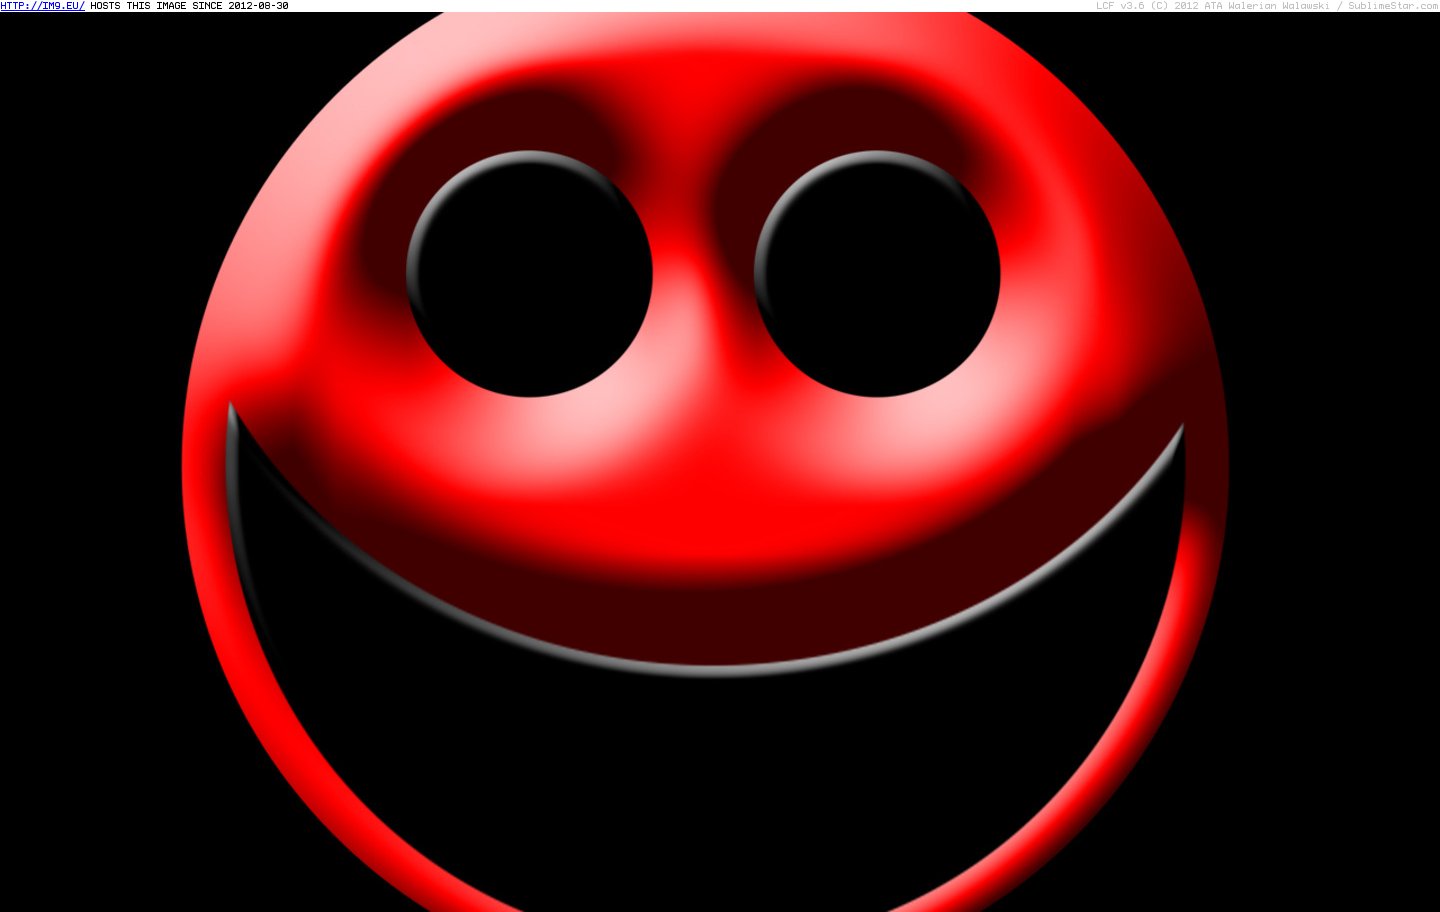 Red Smiley Face (smiley wallpaper) (in Smiley Wallpapers)